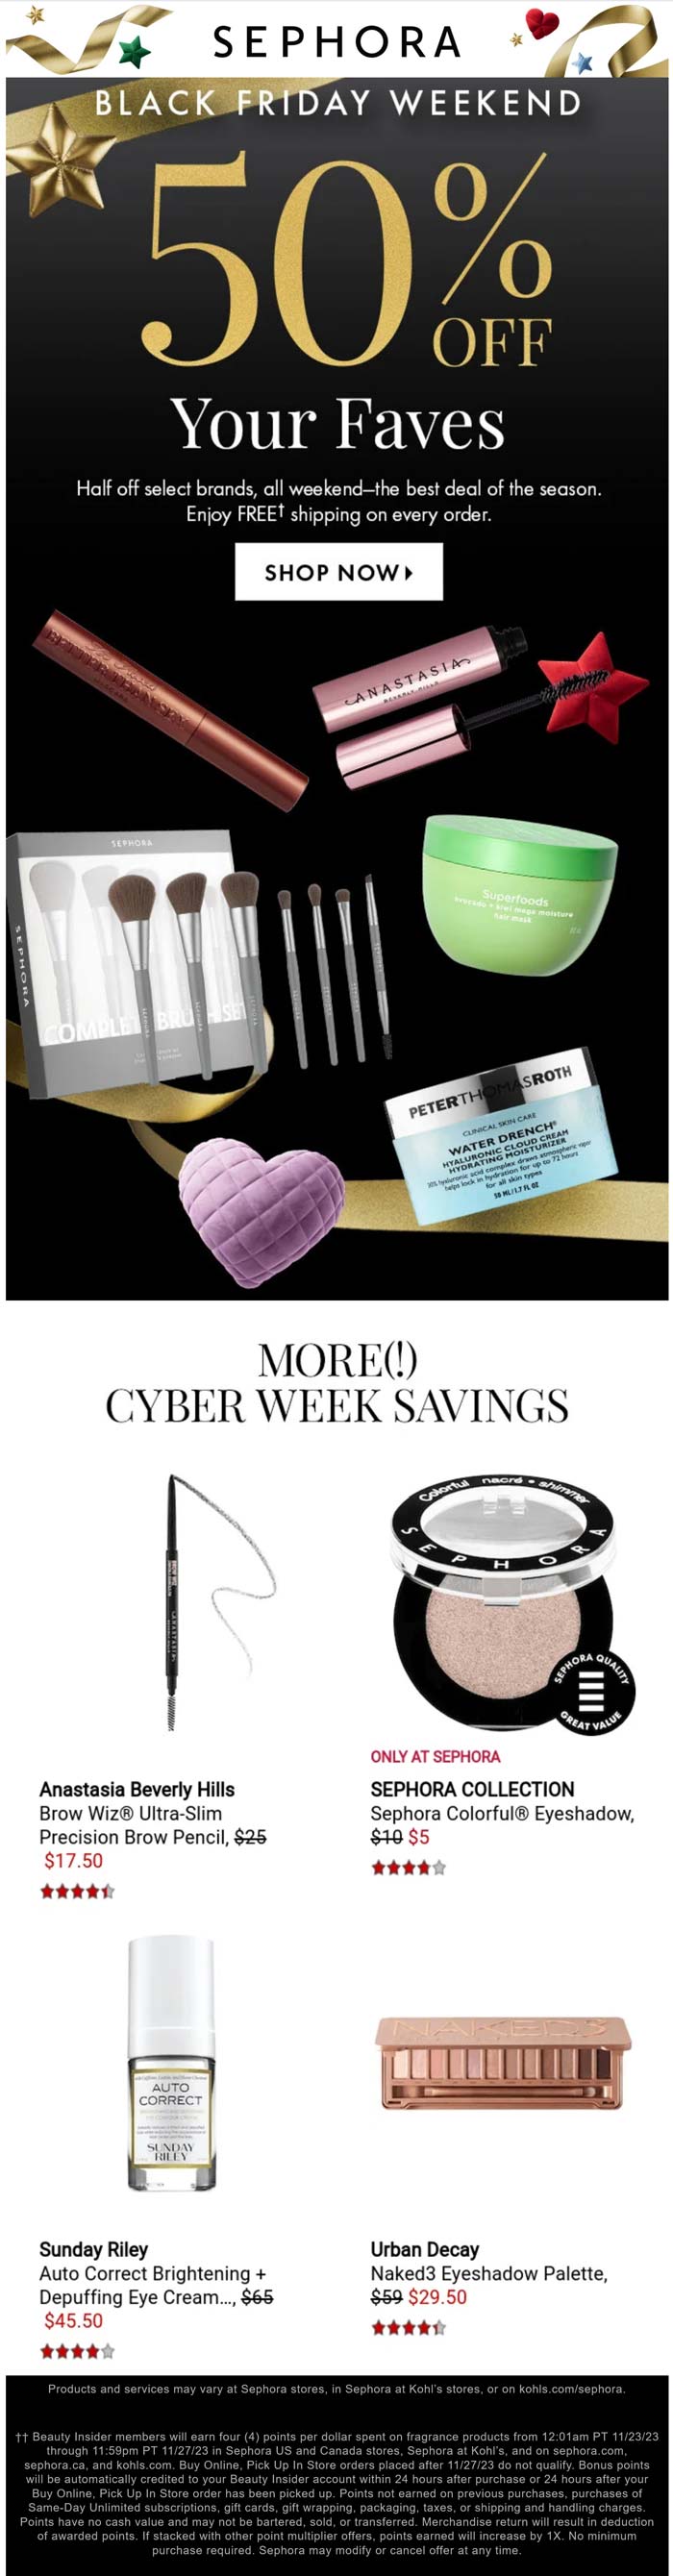 Sephora stores Coupon  50% off faves this weekend with free shipping at Sephora #sephora 